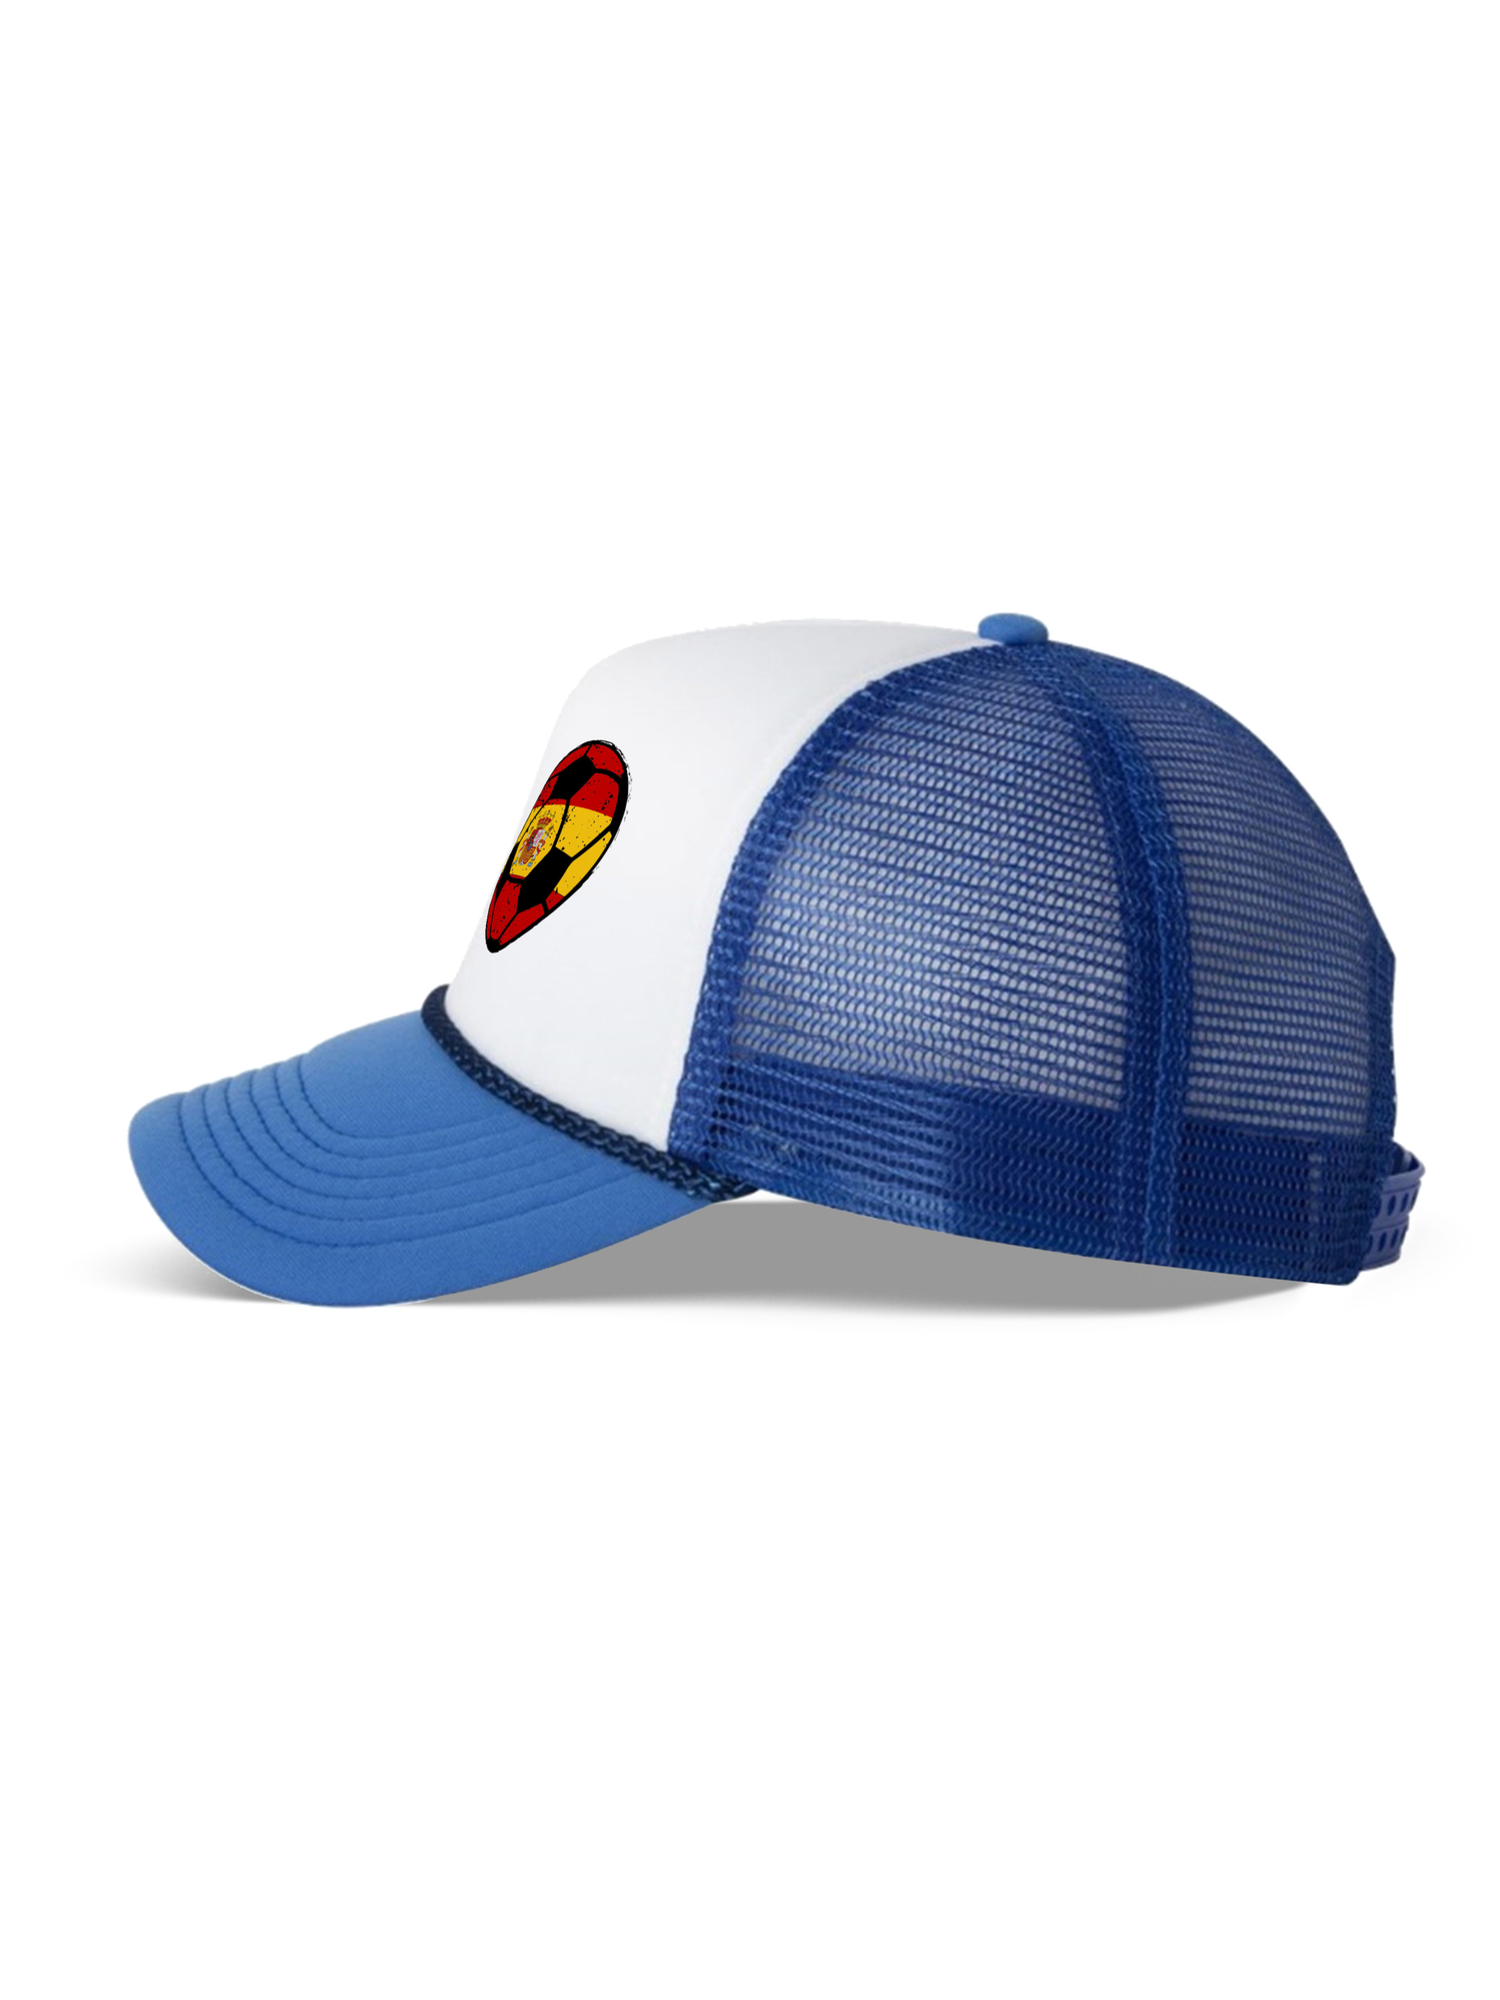 Awkward Styles Spain Soccer Ball Hat Spanish Soccer Trucker Hat Spain 2018 Baseball Cap Spain Trucker Hats for Men and Women Hat Gifts from Spain Spanish Baseball Hats Spanish Flag Trucker Hat - image 3 of 6